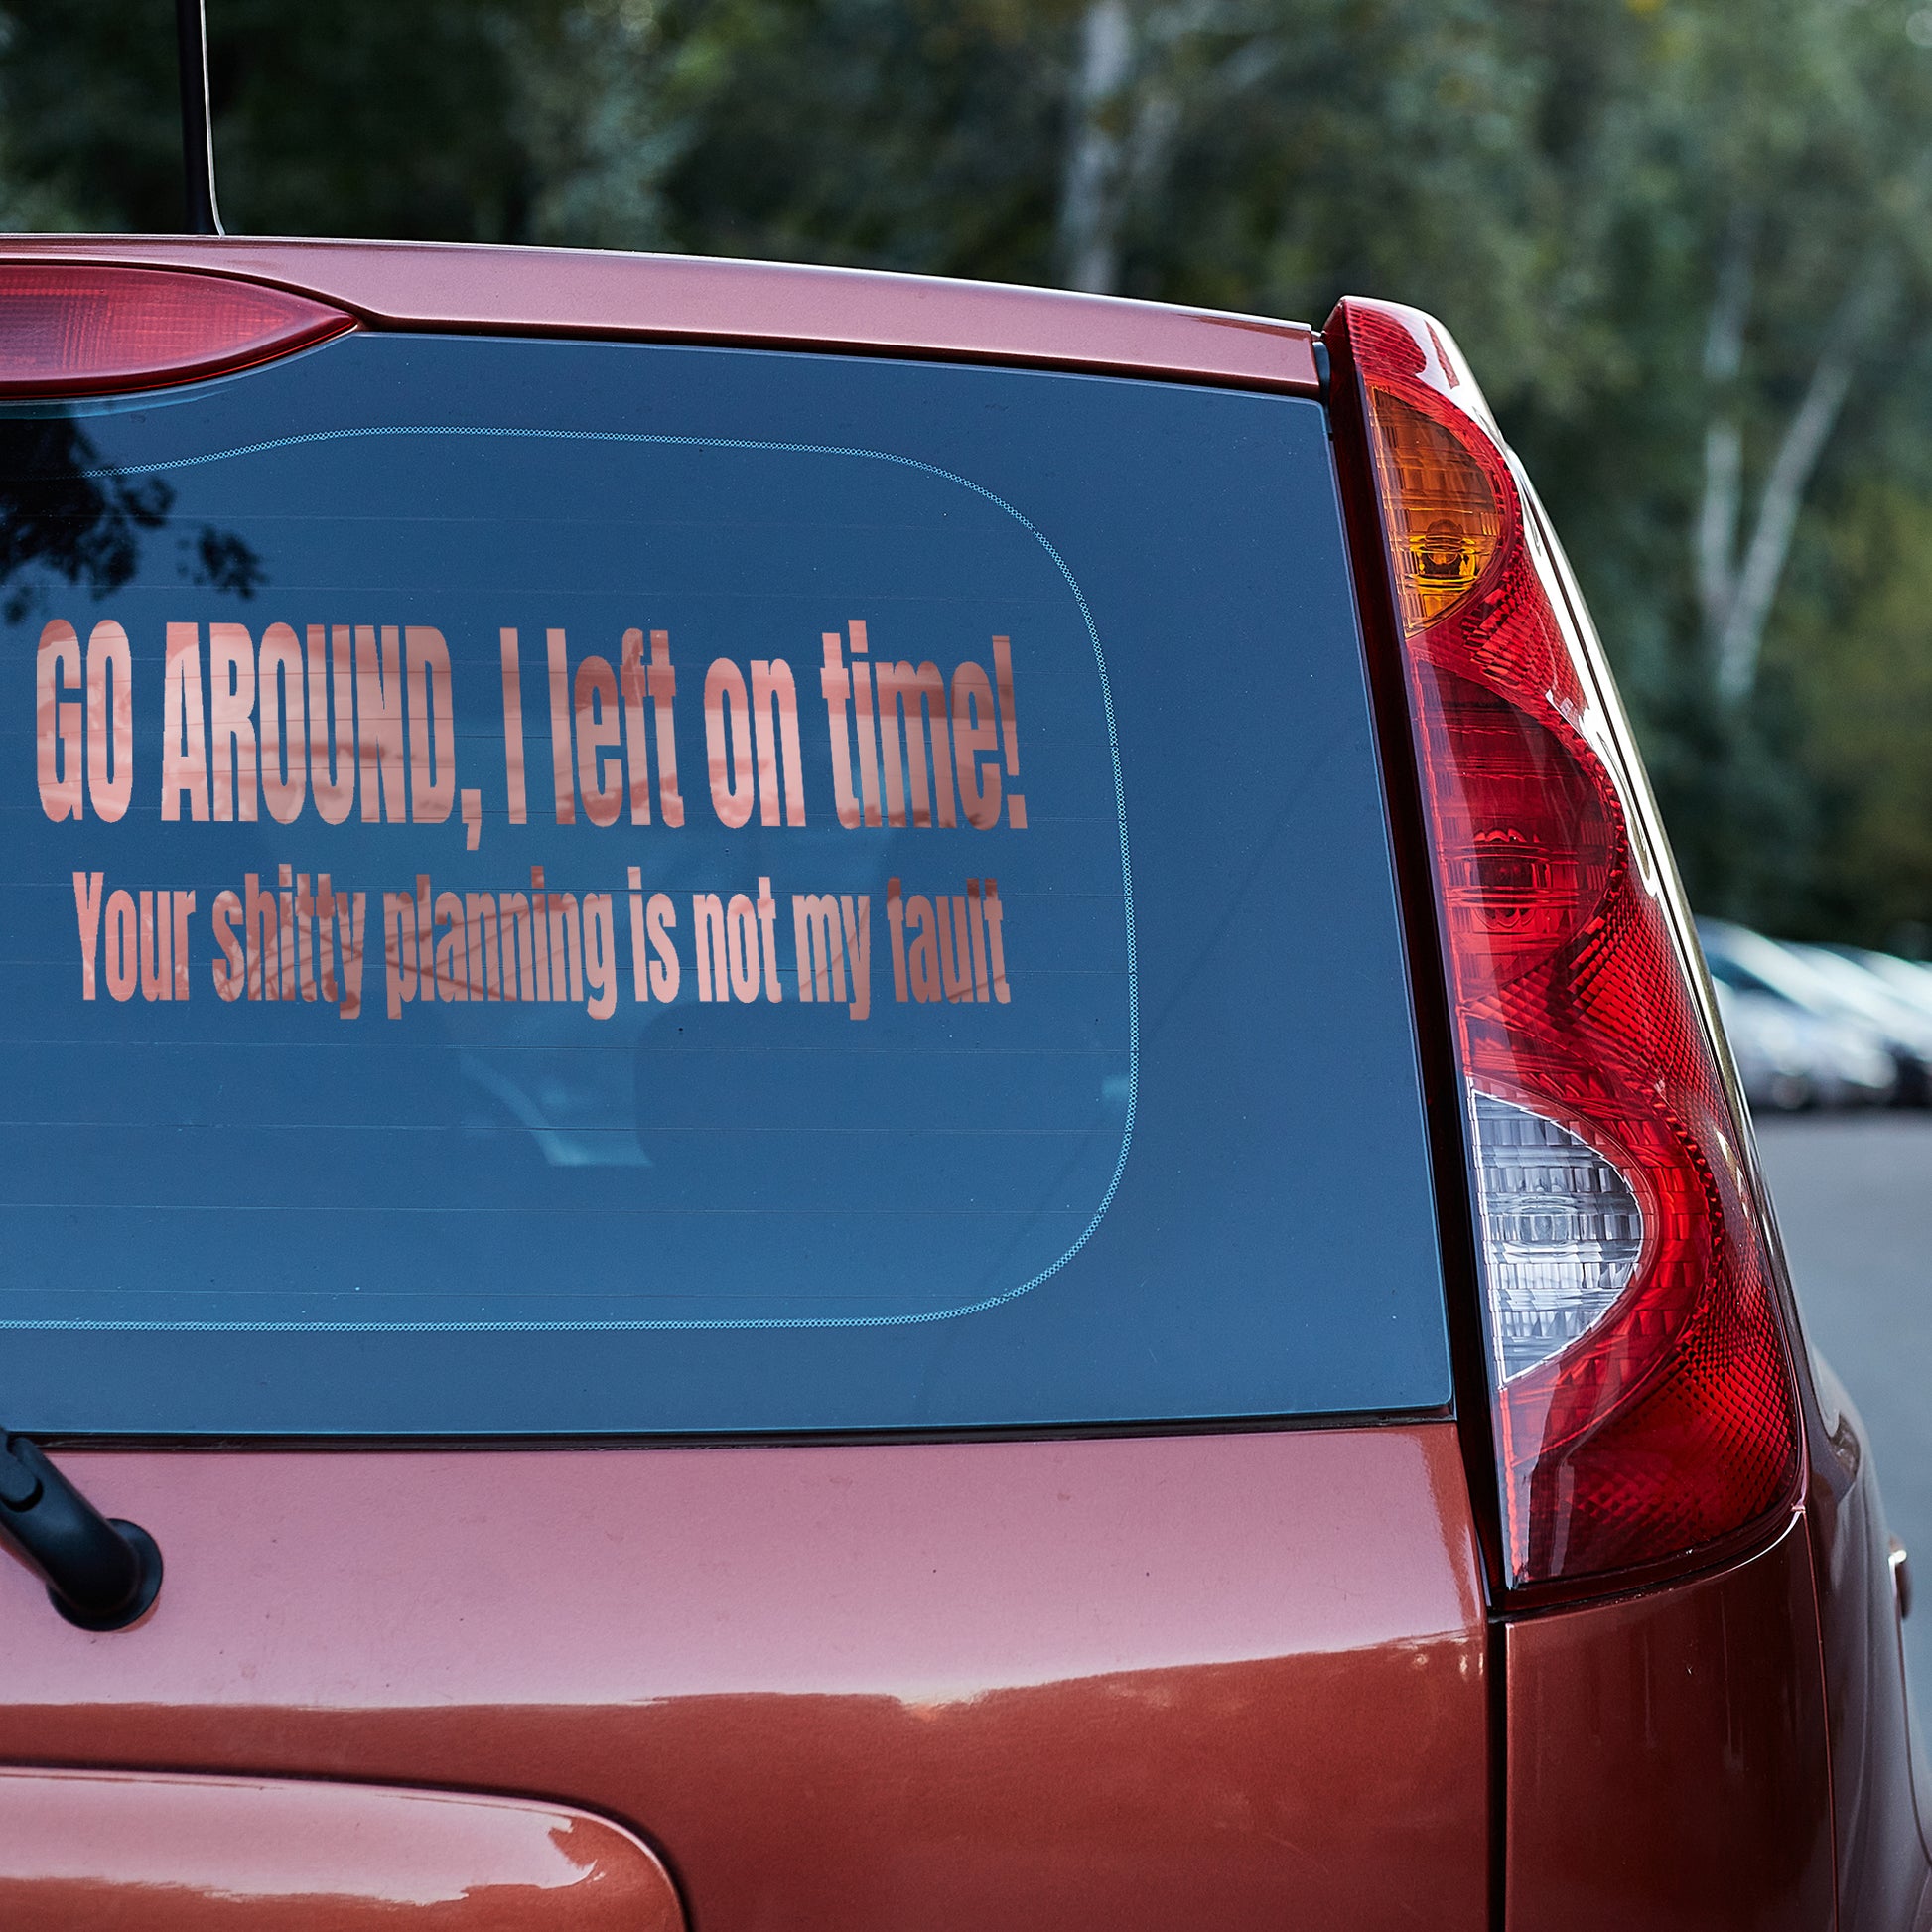 Go around I left on time vinyl decal car decal decal for cars decal for trucks Decals for cars Decals for Trucks decals for tumblers decals for vehicles door decal funny decals tailgater Window decals